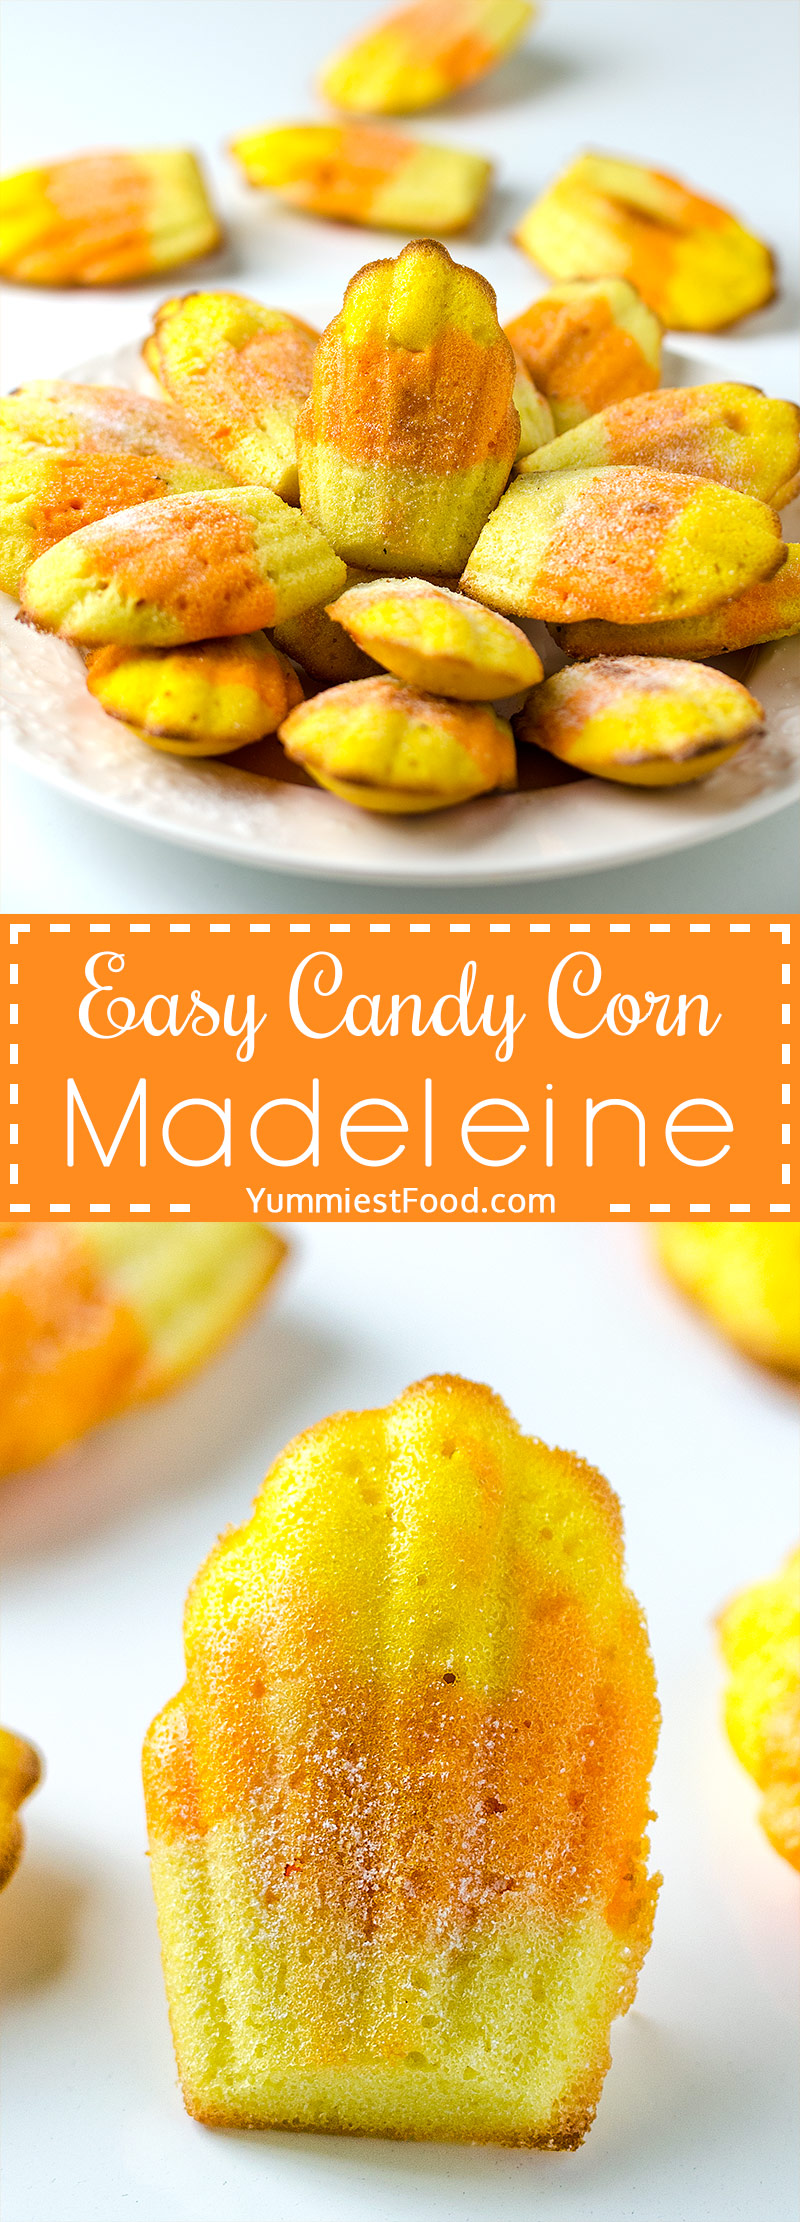 EASY CANDY CORN MADELEINE – Easy and delicious Halloween Candy Corn Madeleine is quick and easy treat that you can make with the kids.